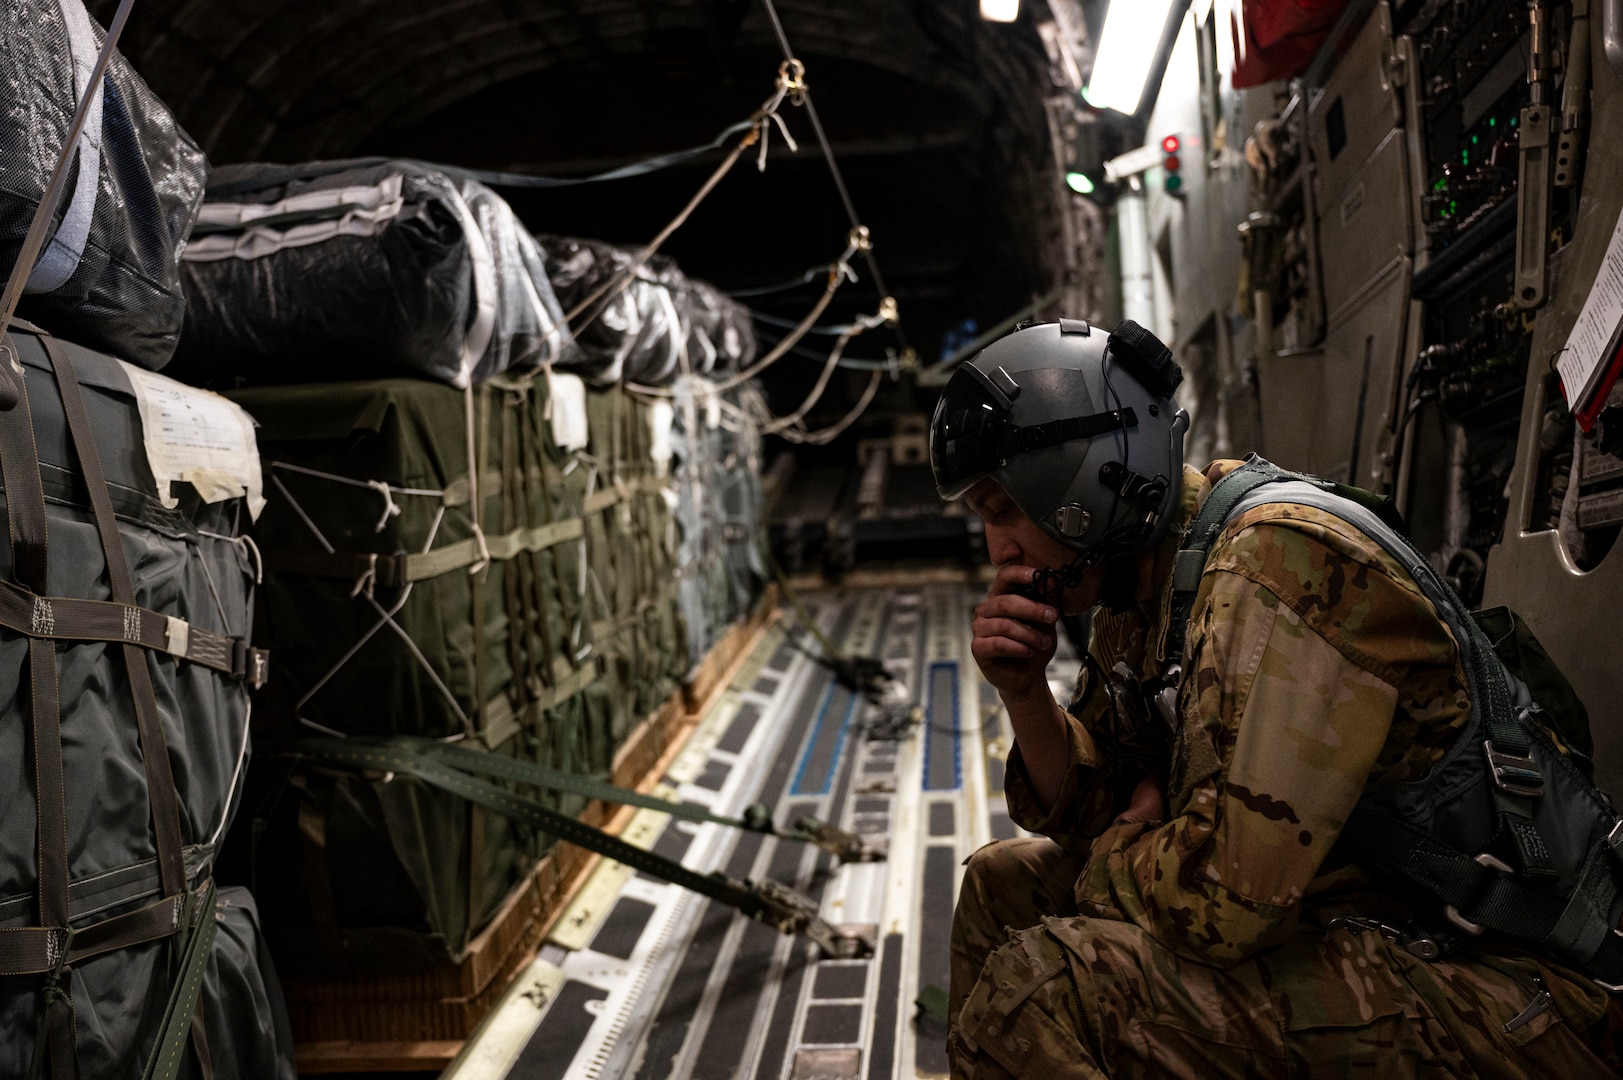 U.S. Air Force Airmen and U.S. Army Central Command Soldiers prepare humanitarian aid for airdrop aboard a U.A. Air Force C-17 Globemaster III at an undisclosed location in the U.S. Central Command area of responsibility, March 21st, 2024. Joint Base Charleston deployed C-17s to further enhance airdrop efforts to deliver humanitarian aid into Gaza. In the Coalition’s effort to support civilians suffering from the hardships of continued conflict in Gaza, the U.S. delivered aid via airdrop to ensure expedited delivery and access to critical aid. (U.S. Air Force photo by Staff Sgt Christian Sullivan)